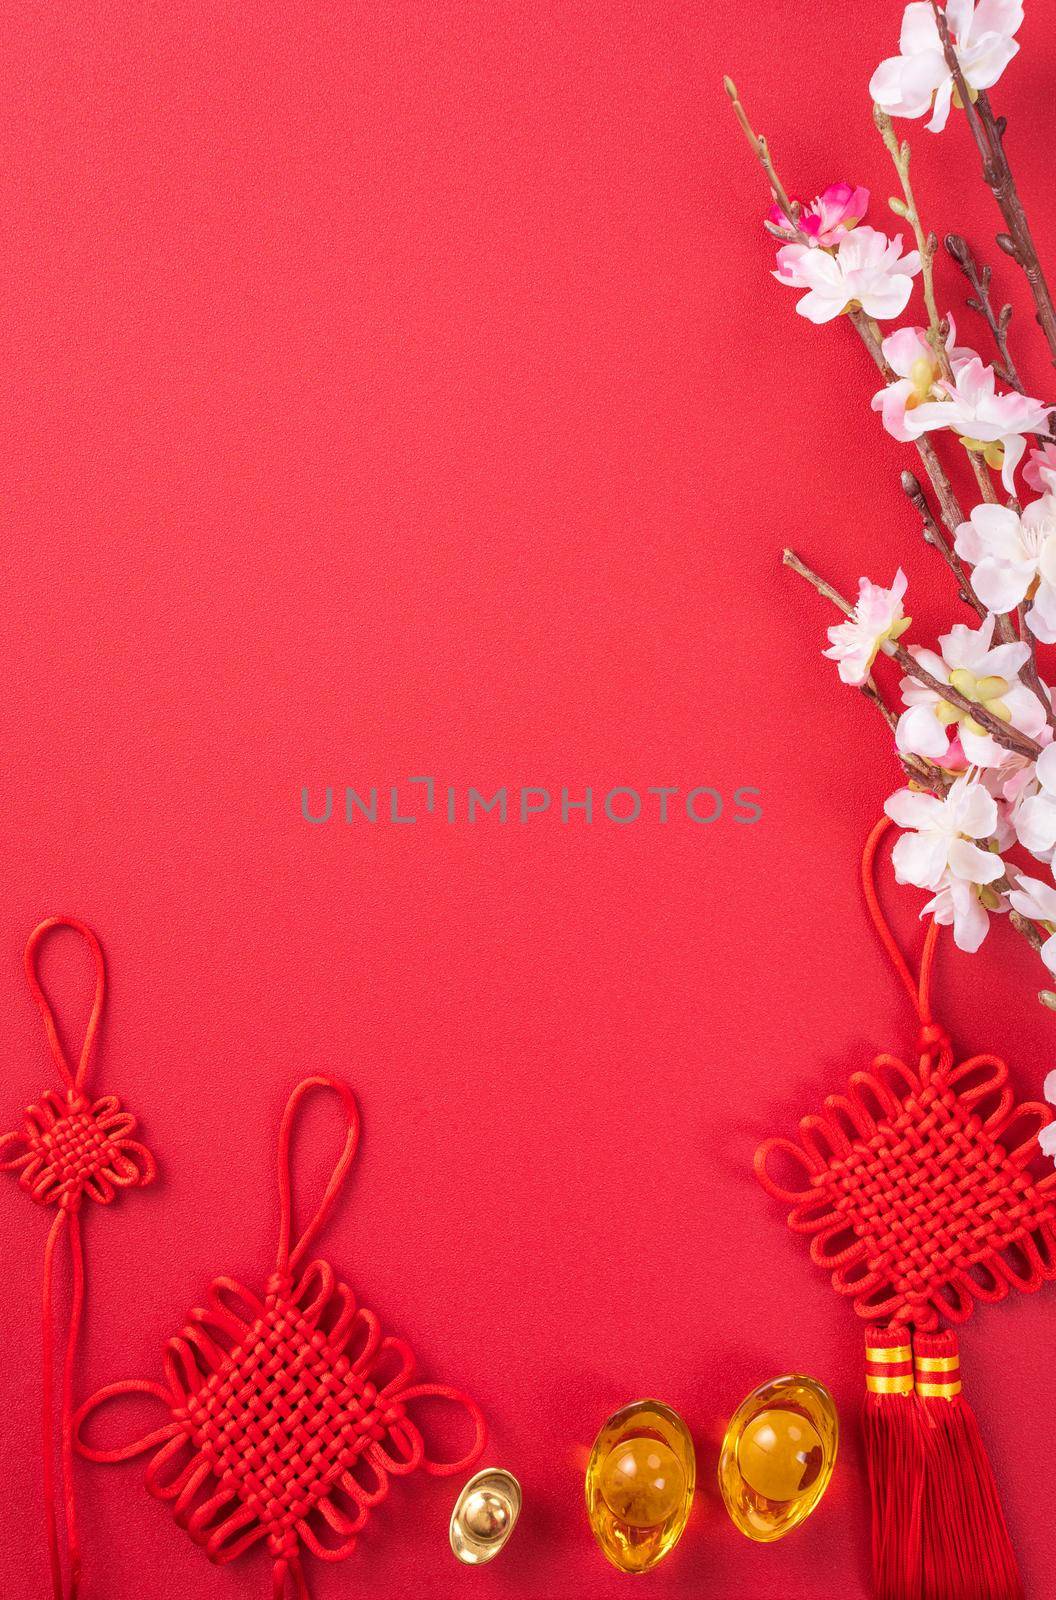 Design concept of Chinese lunar new year - Beautiful Chinese knot with plum blossom isolated on red background, flat lay, top view, overhead layout. by ROMIXIMAGE